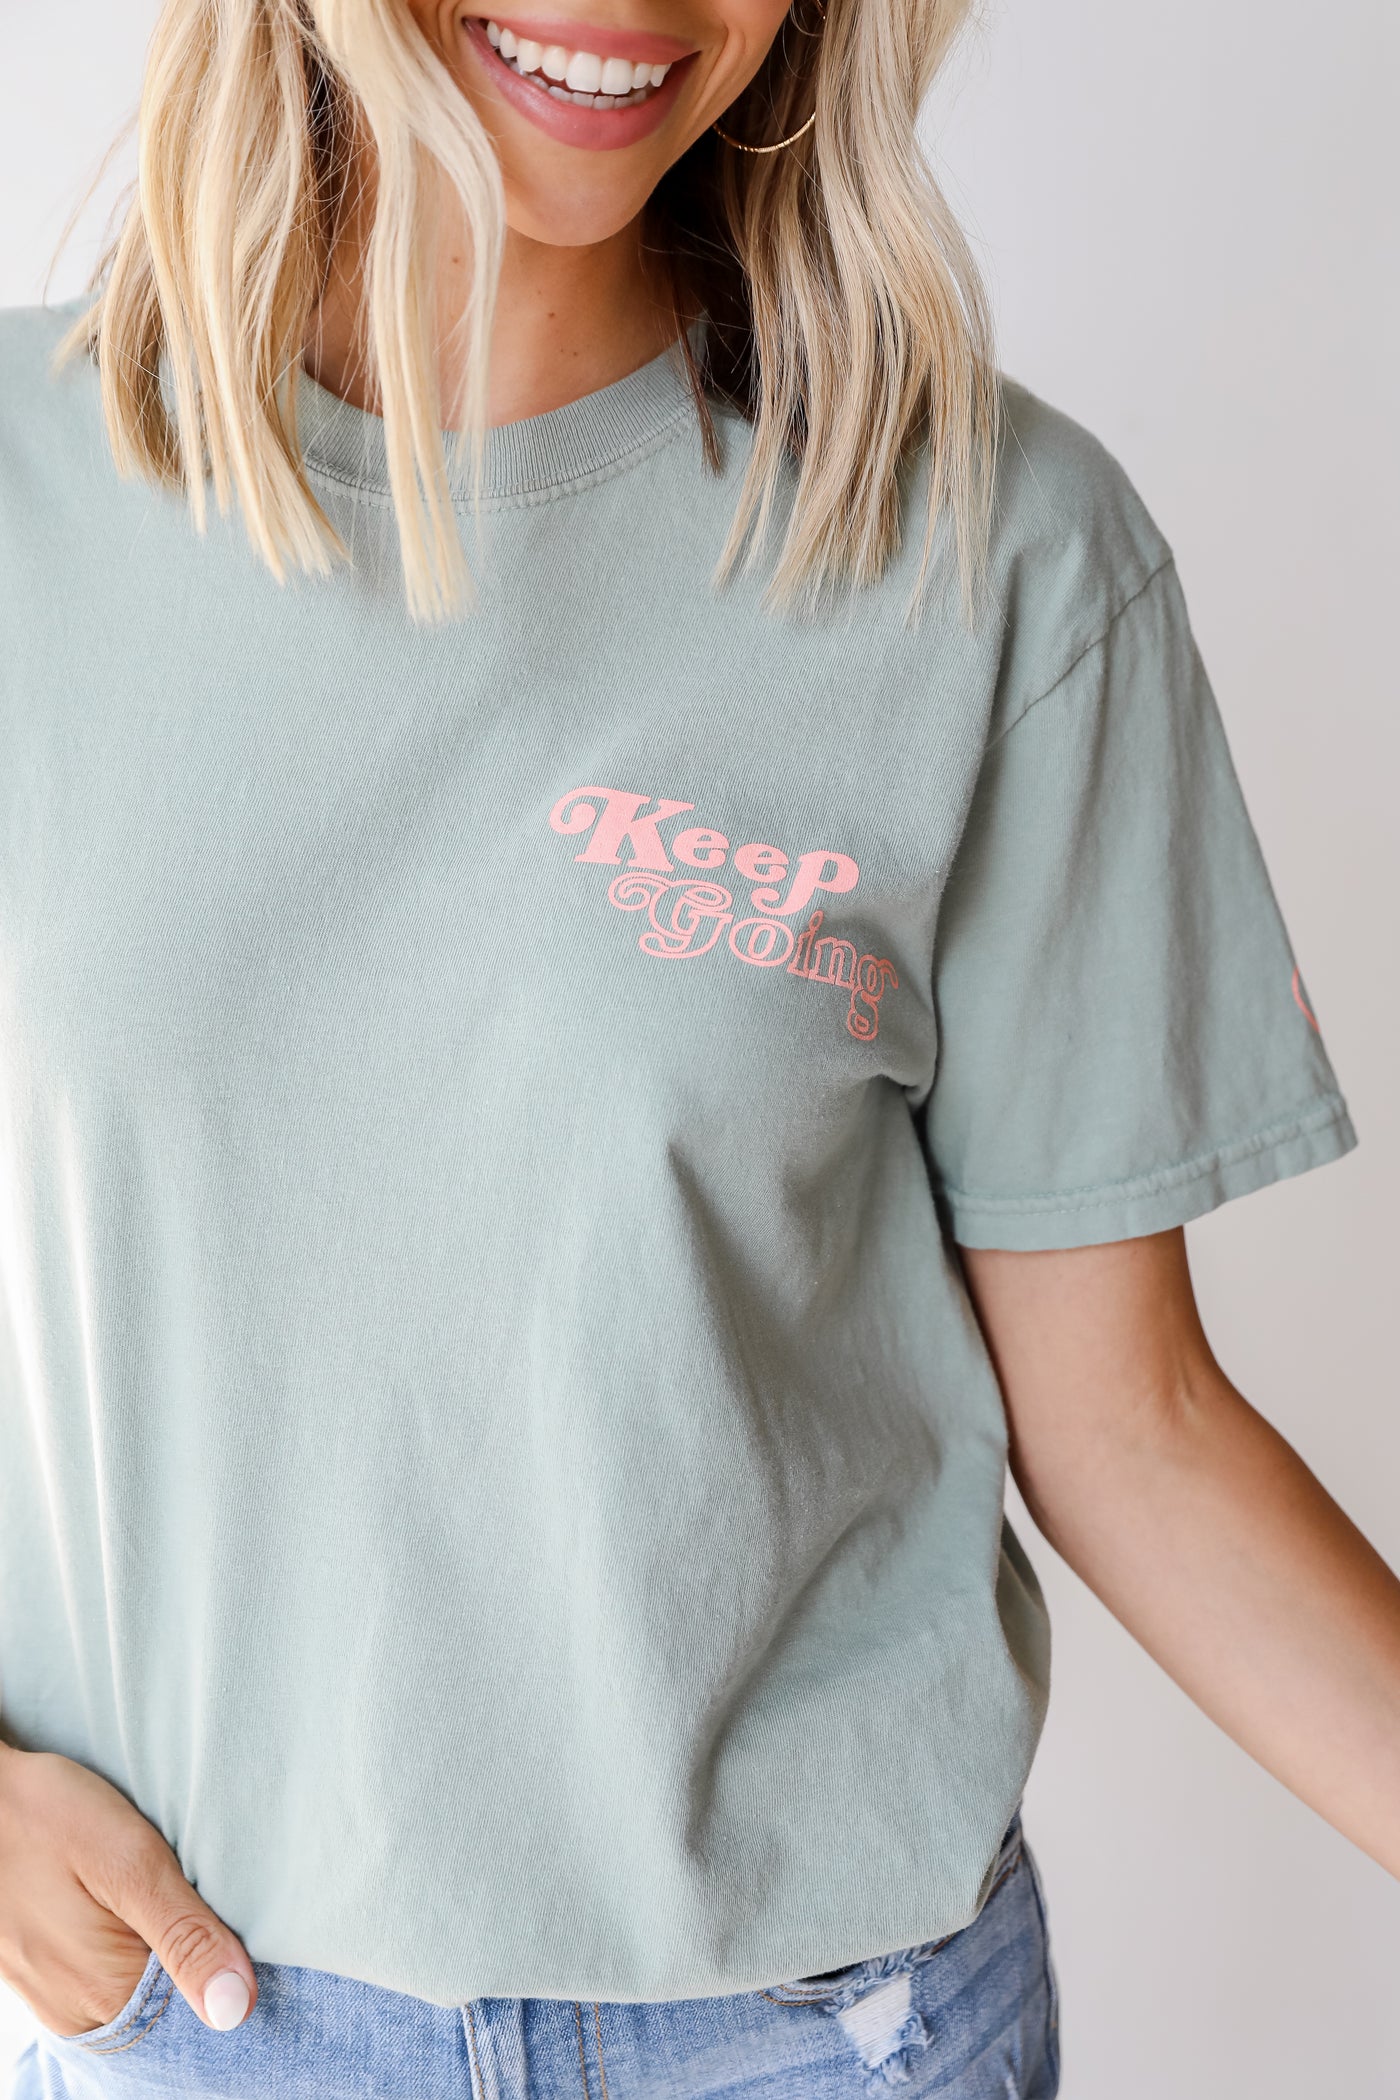 Keep Going Graphic Tee from dress up